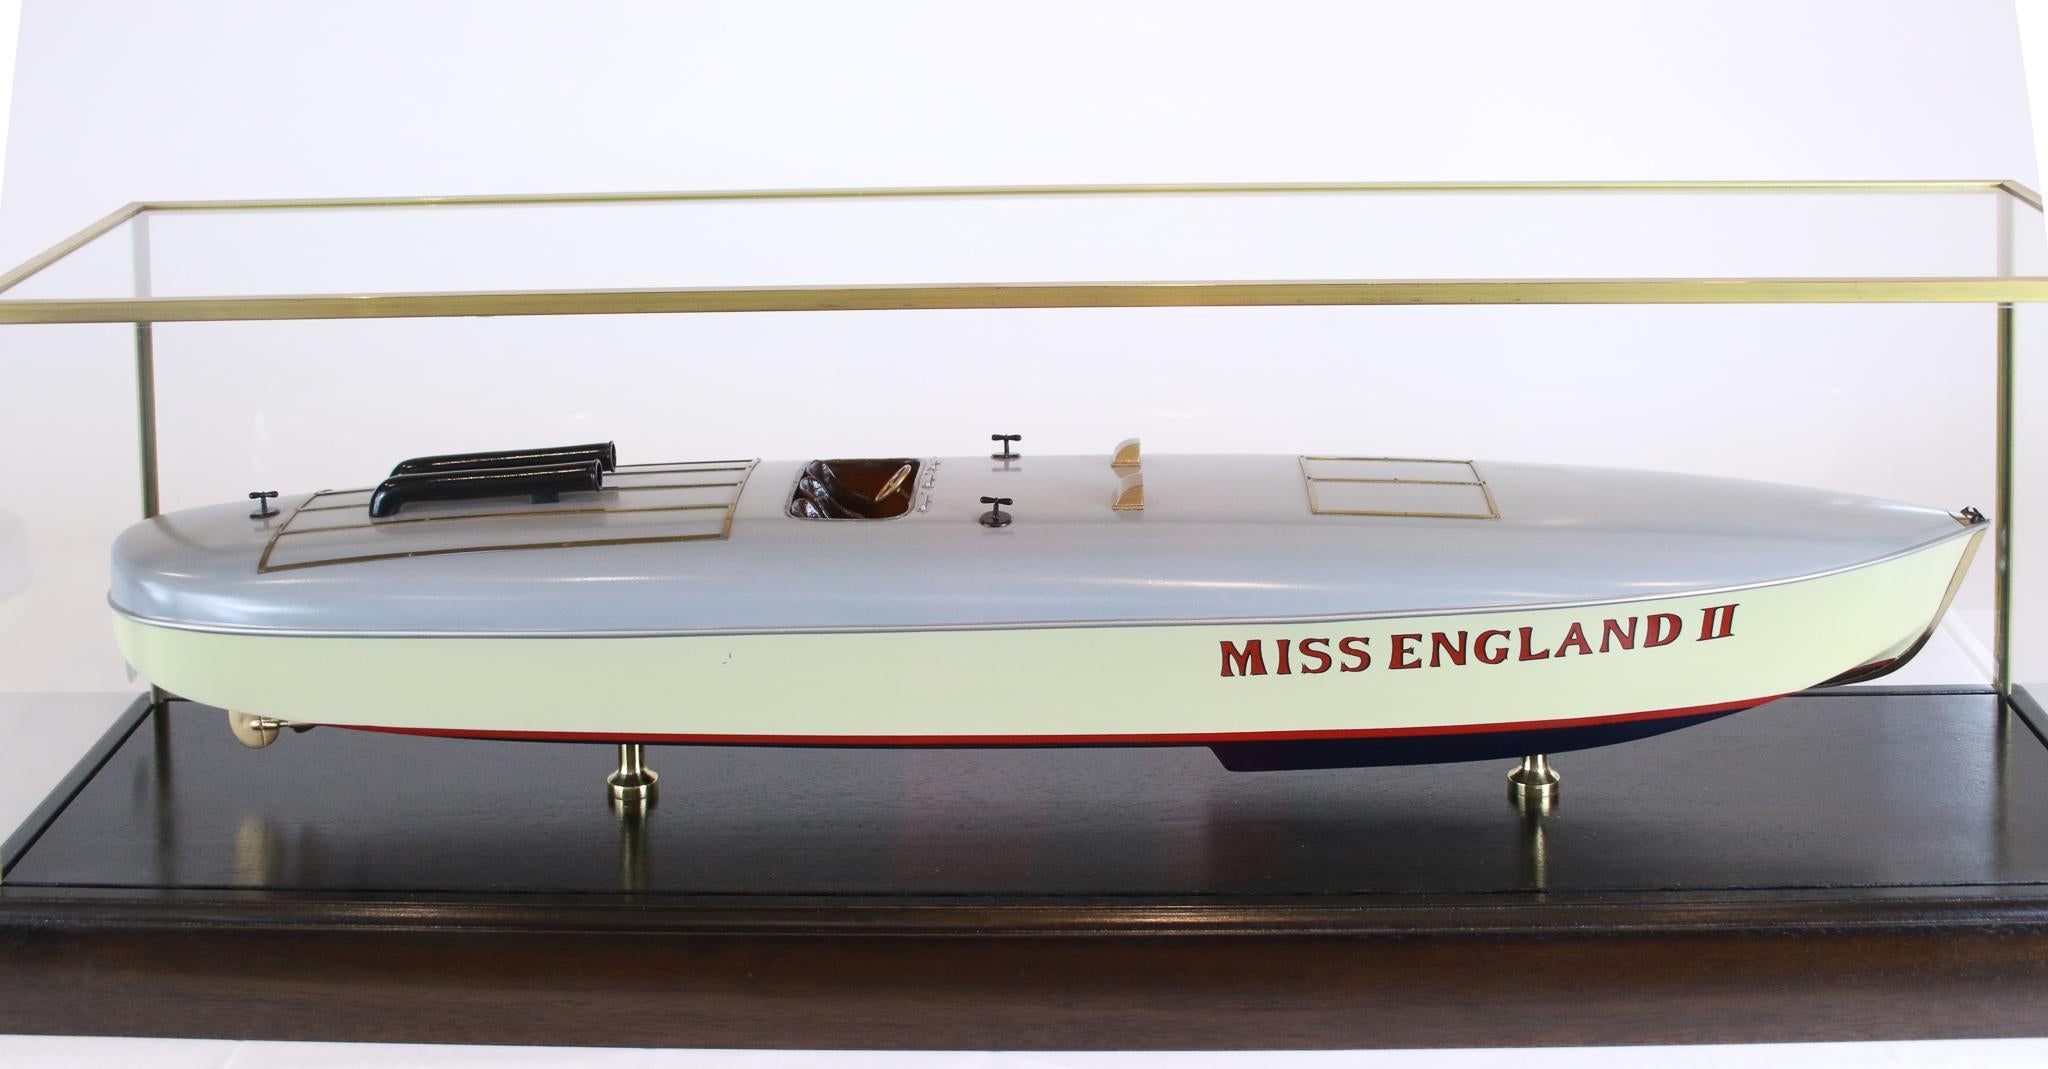 Static model of the early 20th century speedboat Miss England II. Miss England II was a racing monohull hydroplane with twin Rolls-Royce R-type V-12 aero engines specifically designed to contest world water speed records. On June 13, 1930, she broke